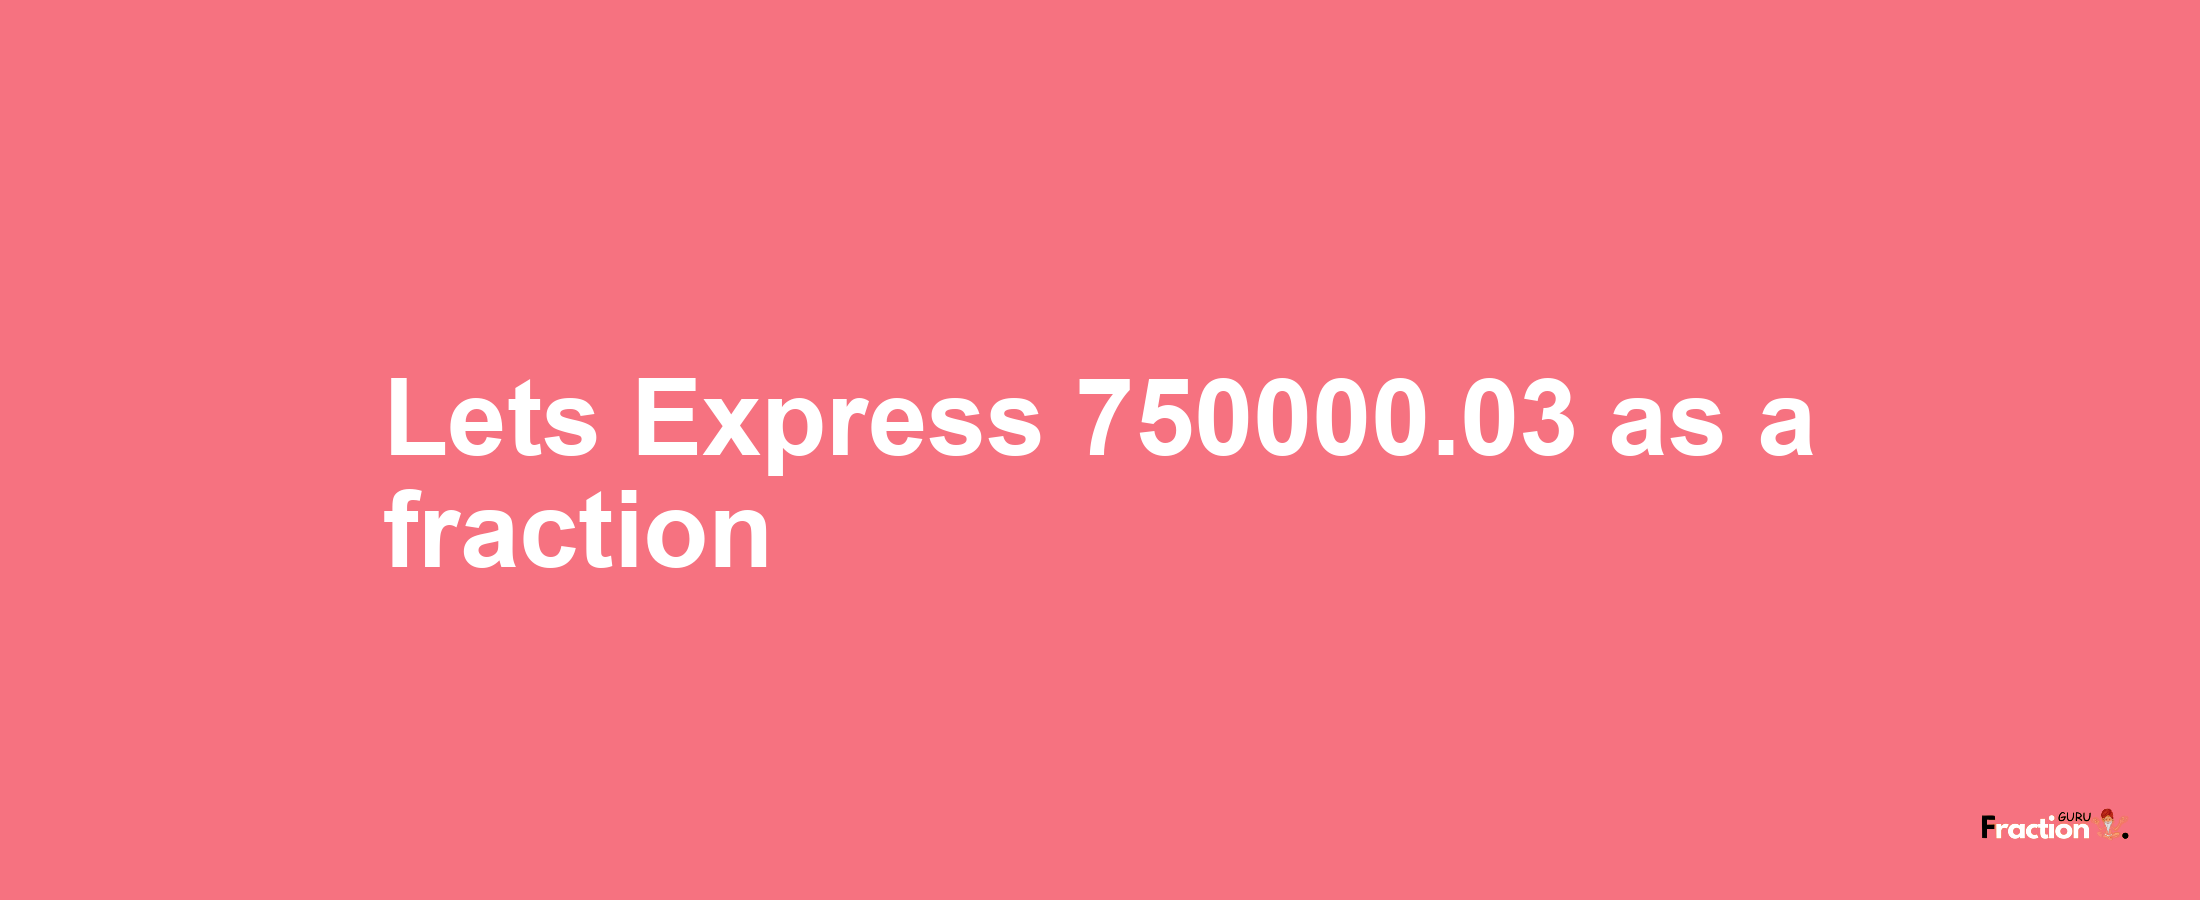 Lets Express 750000.03 as afraction